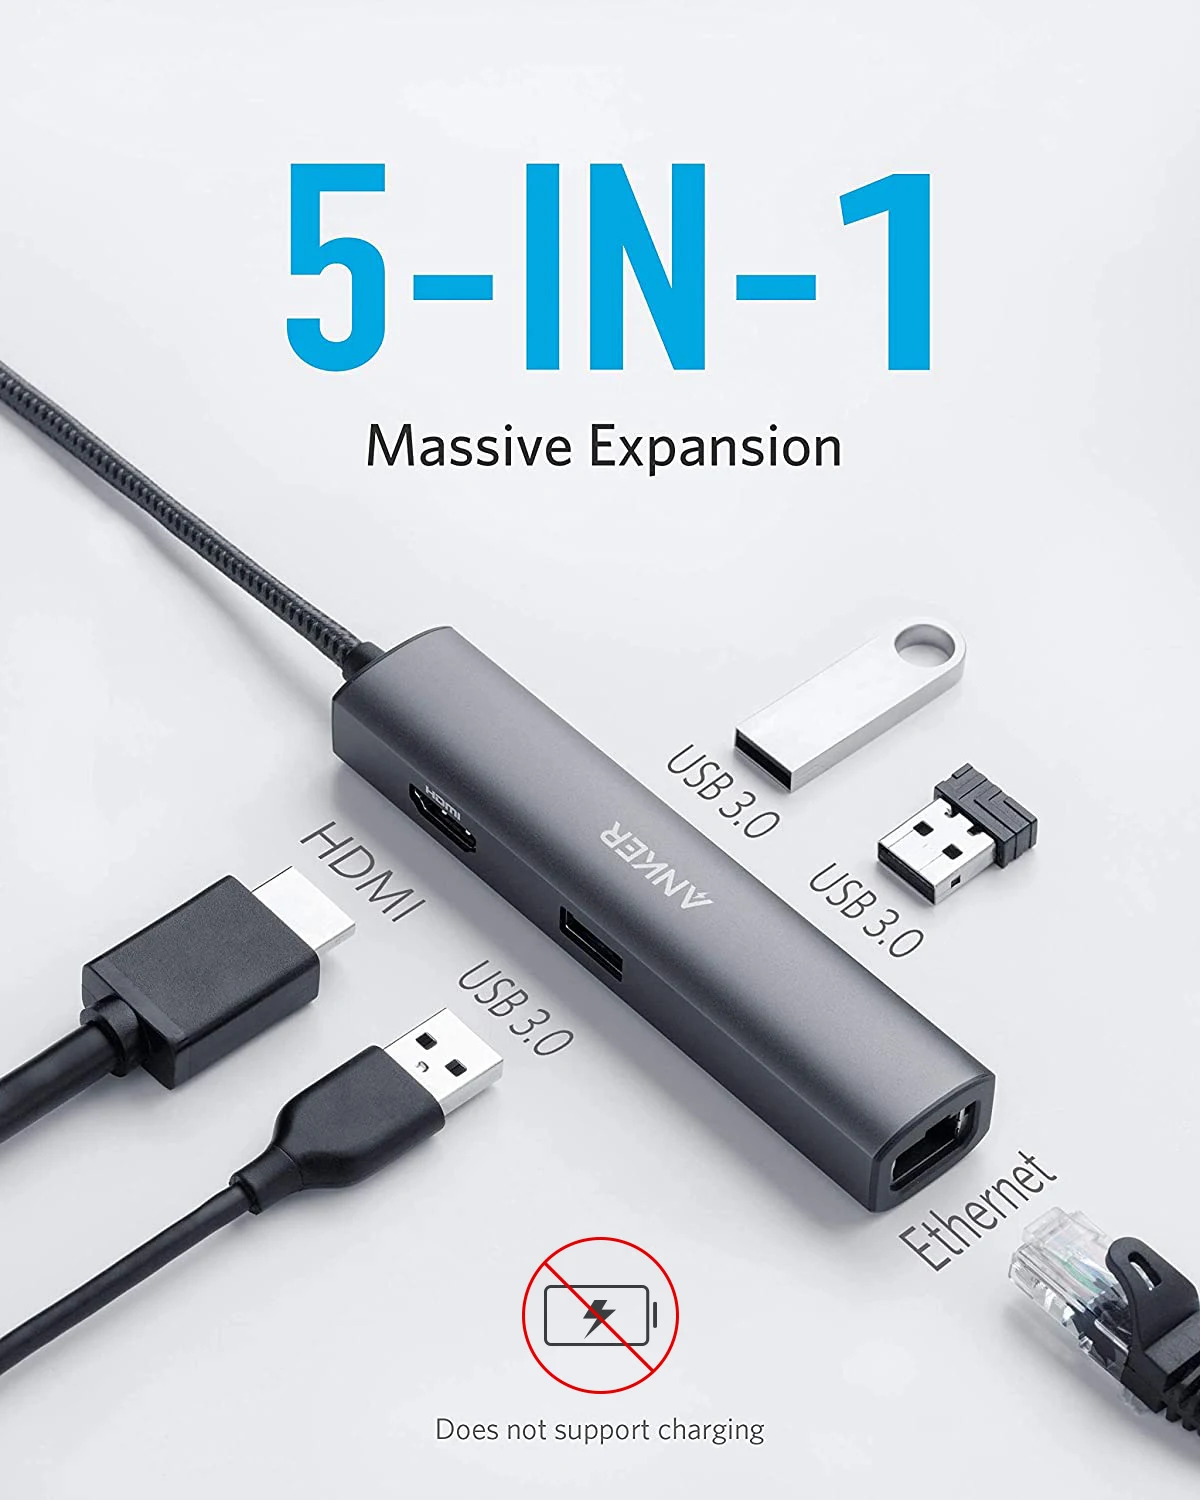  Anker 332 USB-C Hub (5-in-1) with 4K HDMI Display